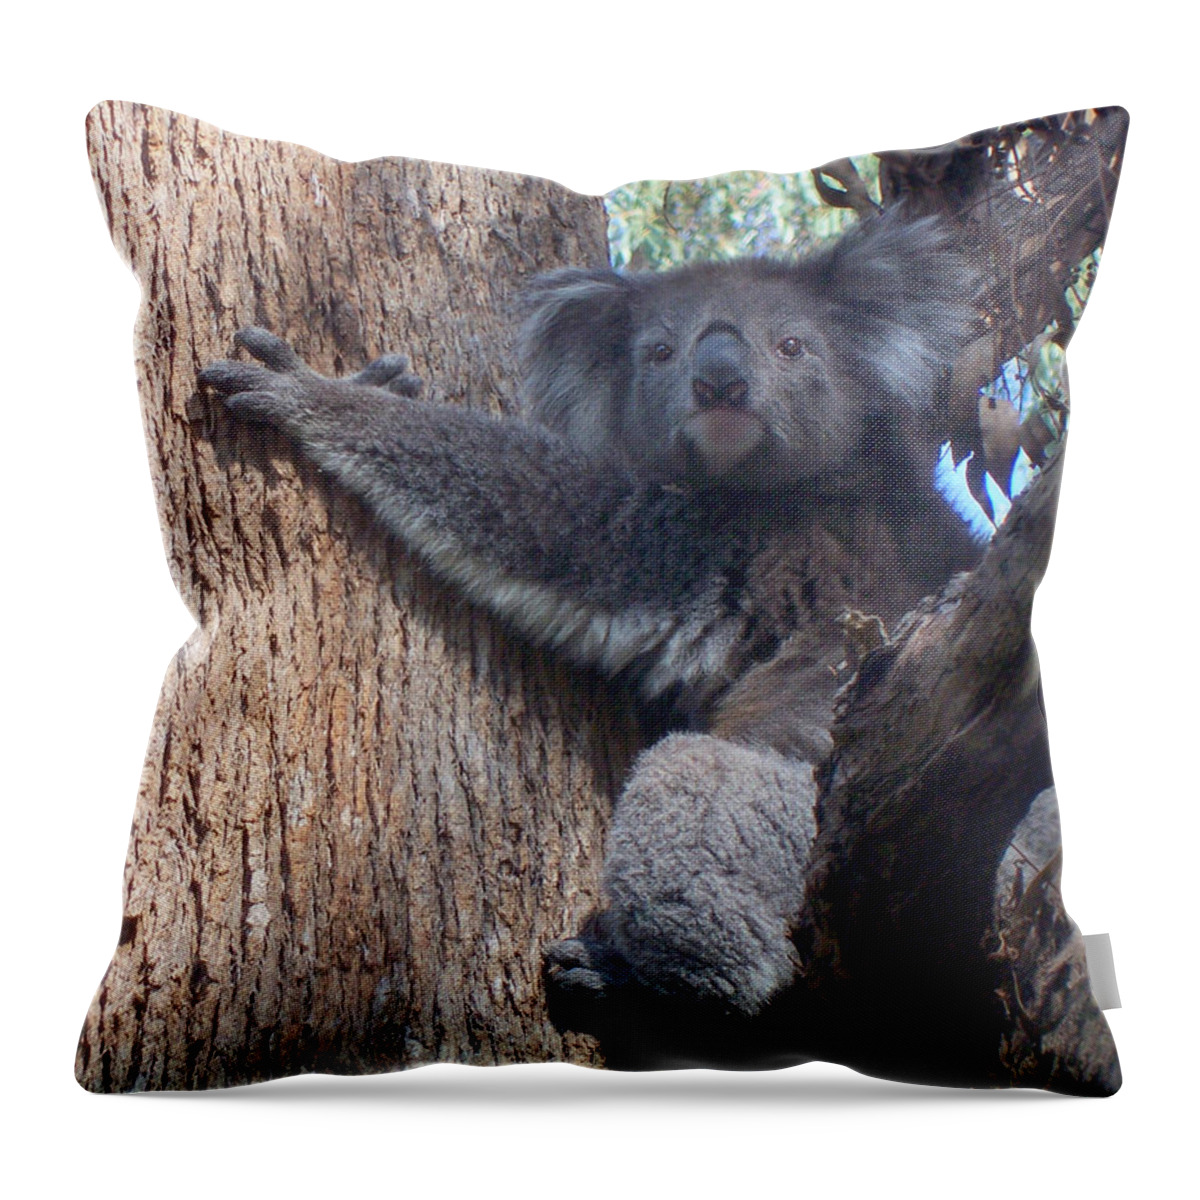 Koala Throw Pillow featuring the photograph Good Morning by Evelyn Tambour